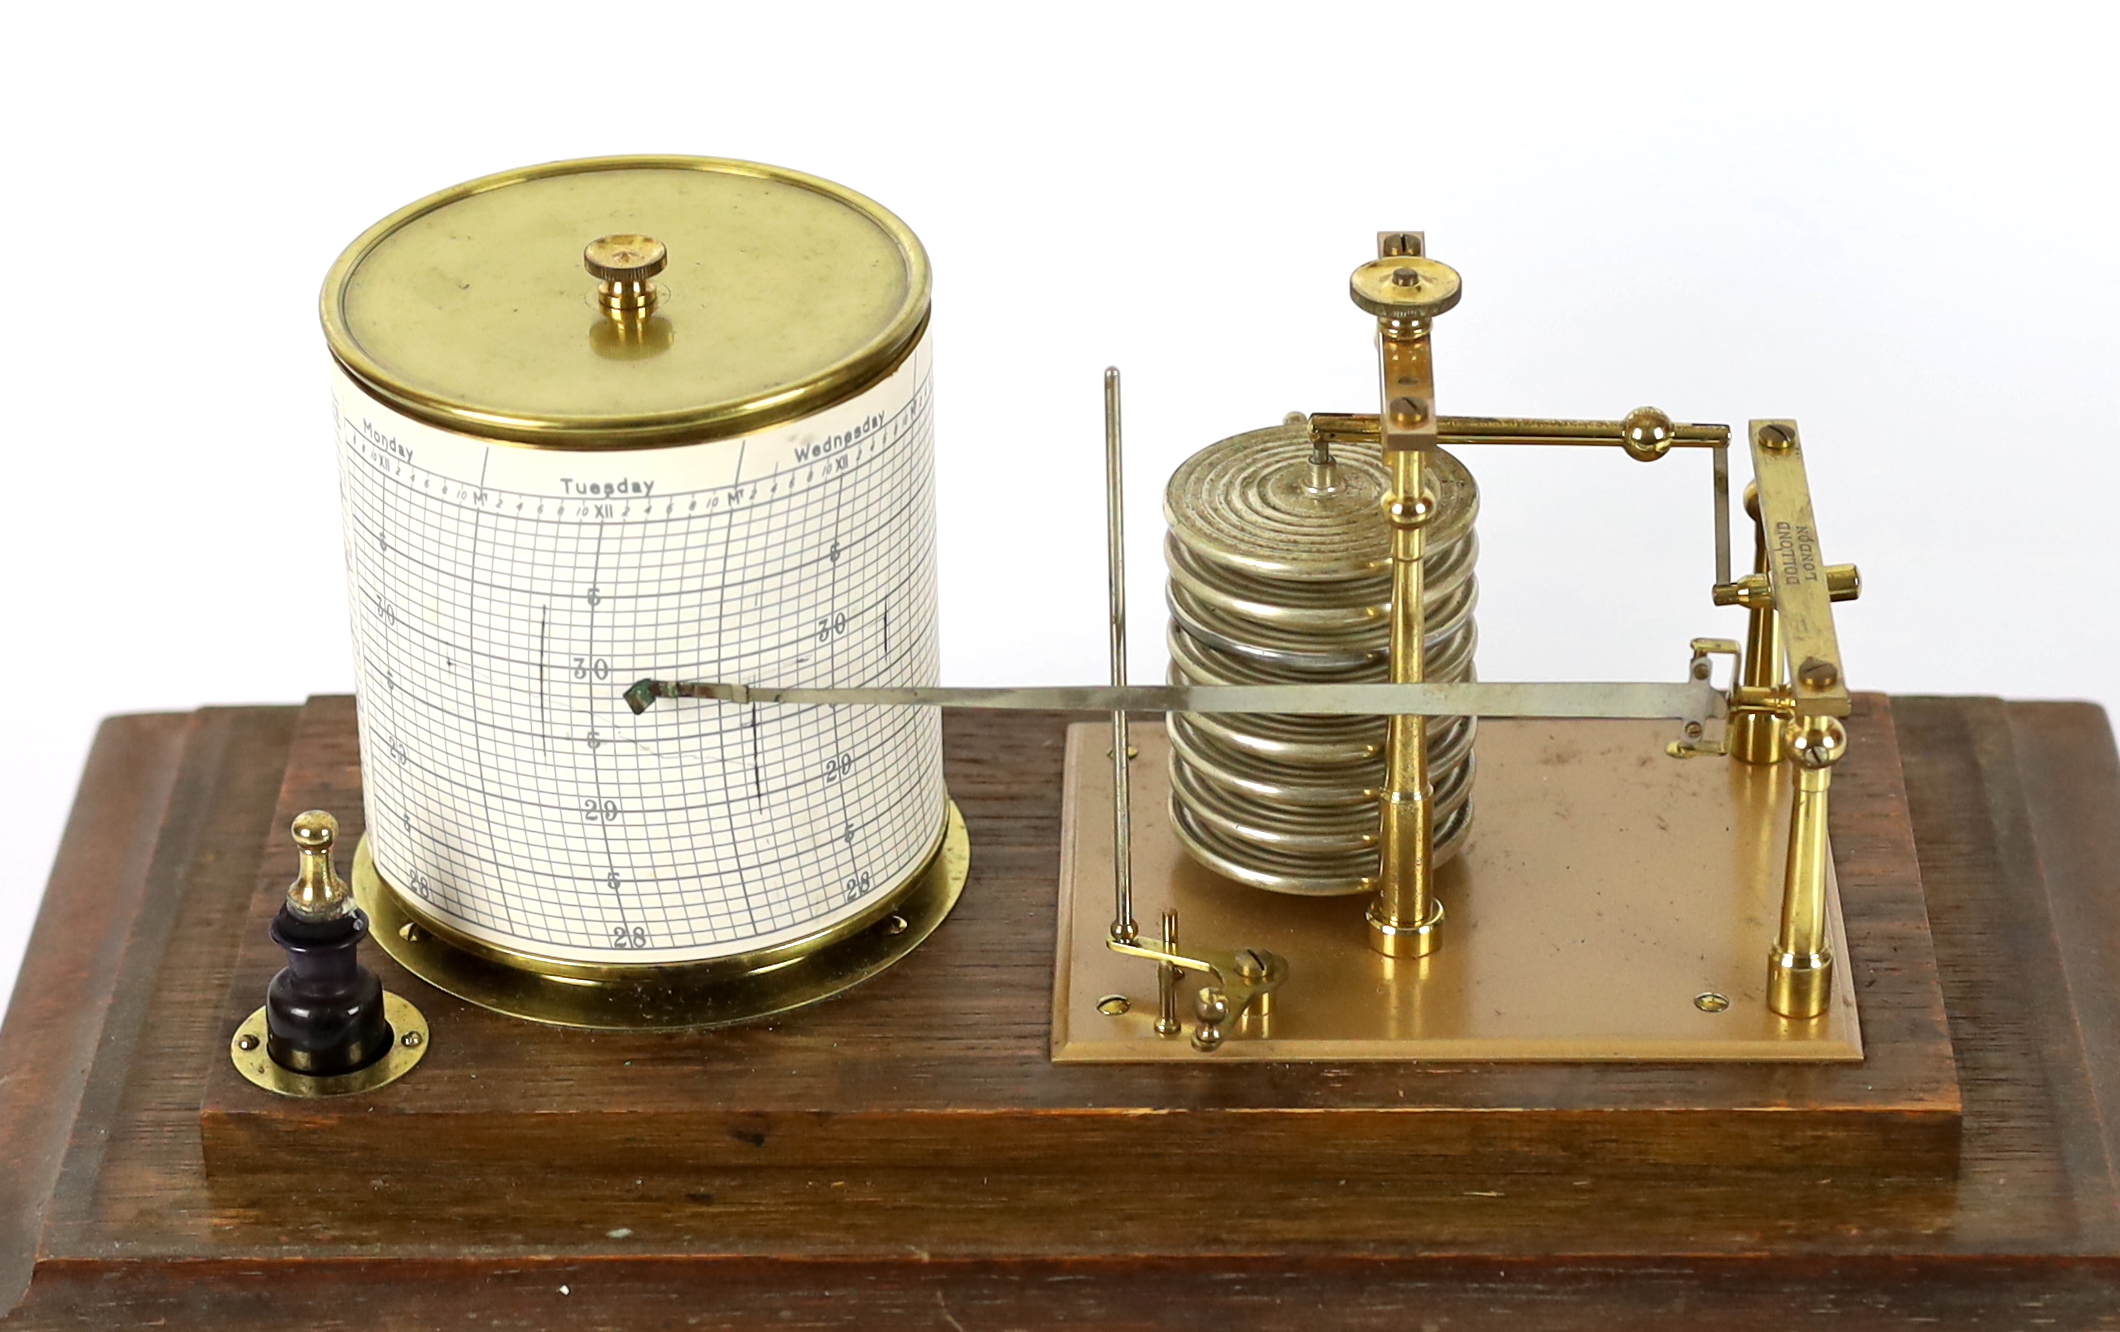 A barograph by Dollond in an oak case with bevelled glass panels and incorporating an ink bottle and a drawer with spare graph papers, 36.5cm x 21.5cm